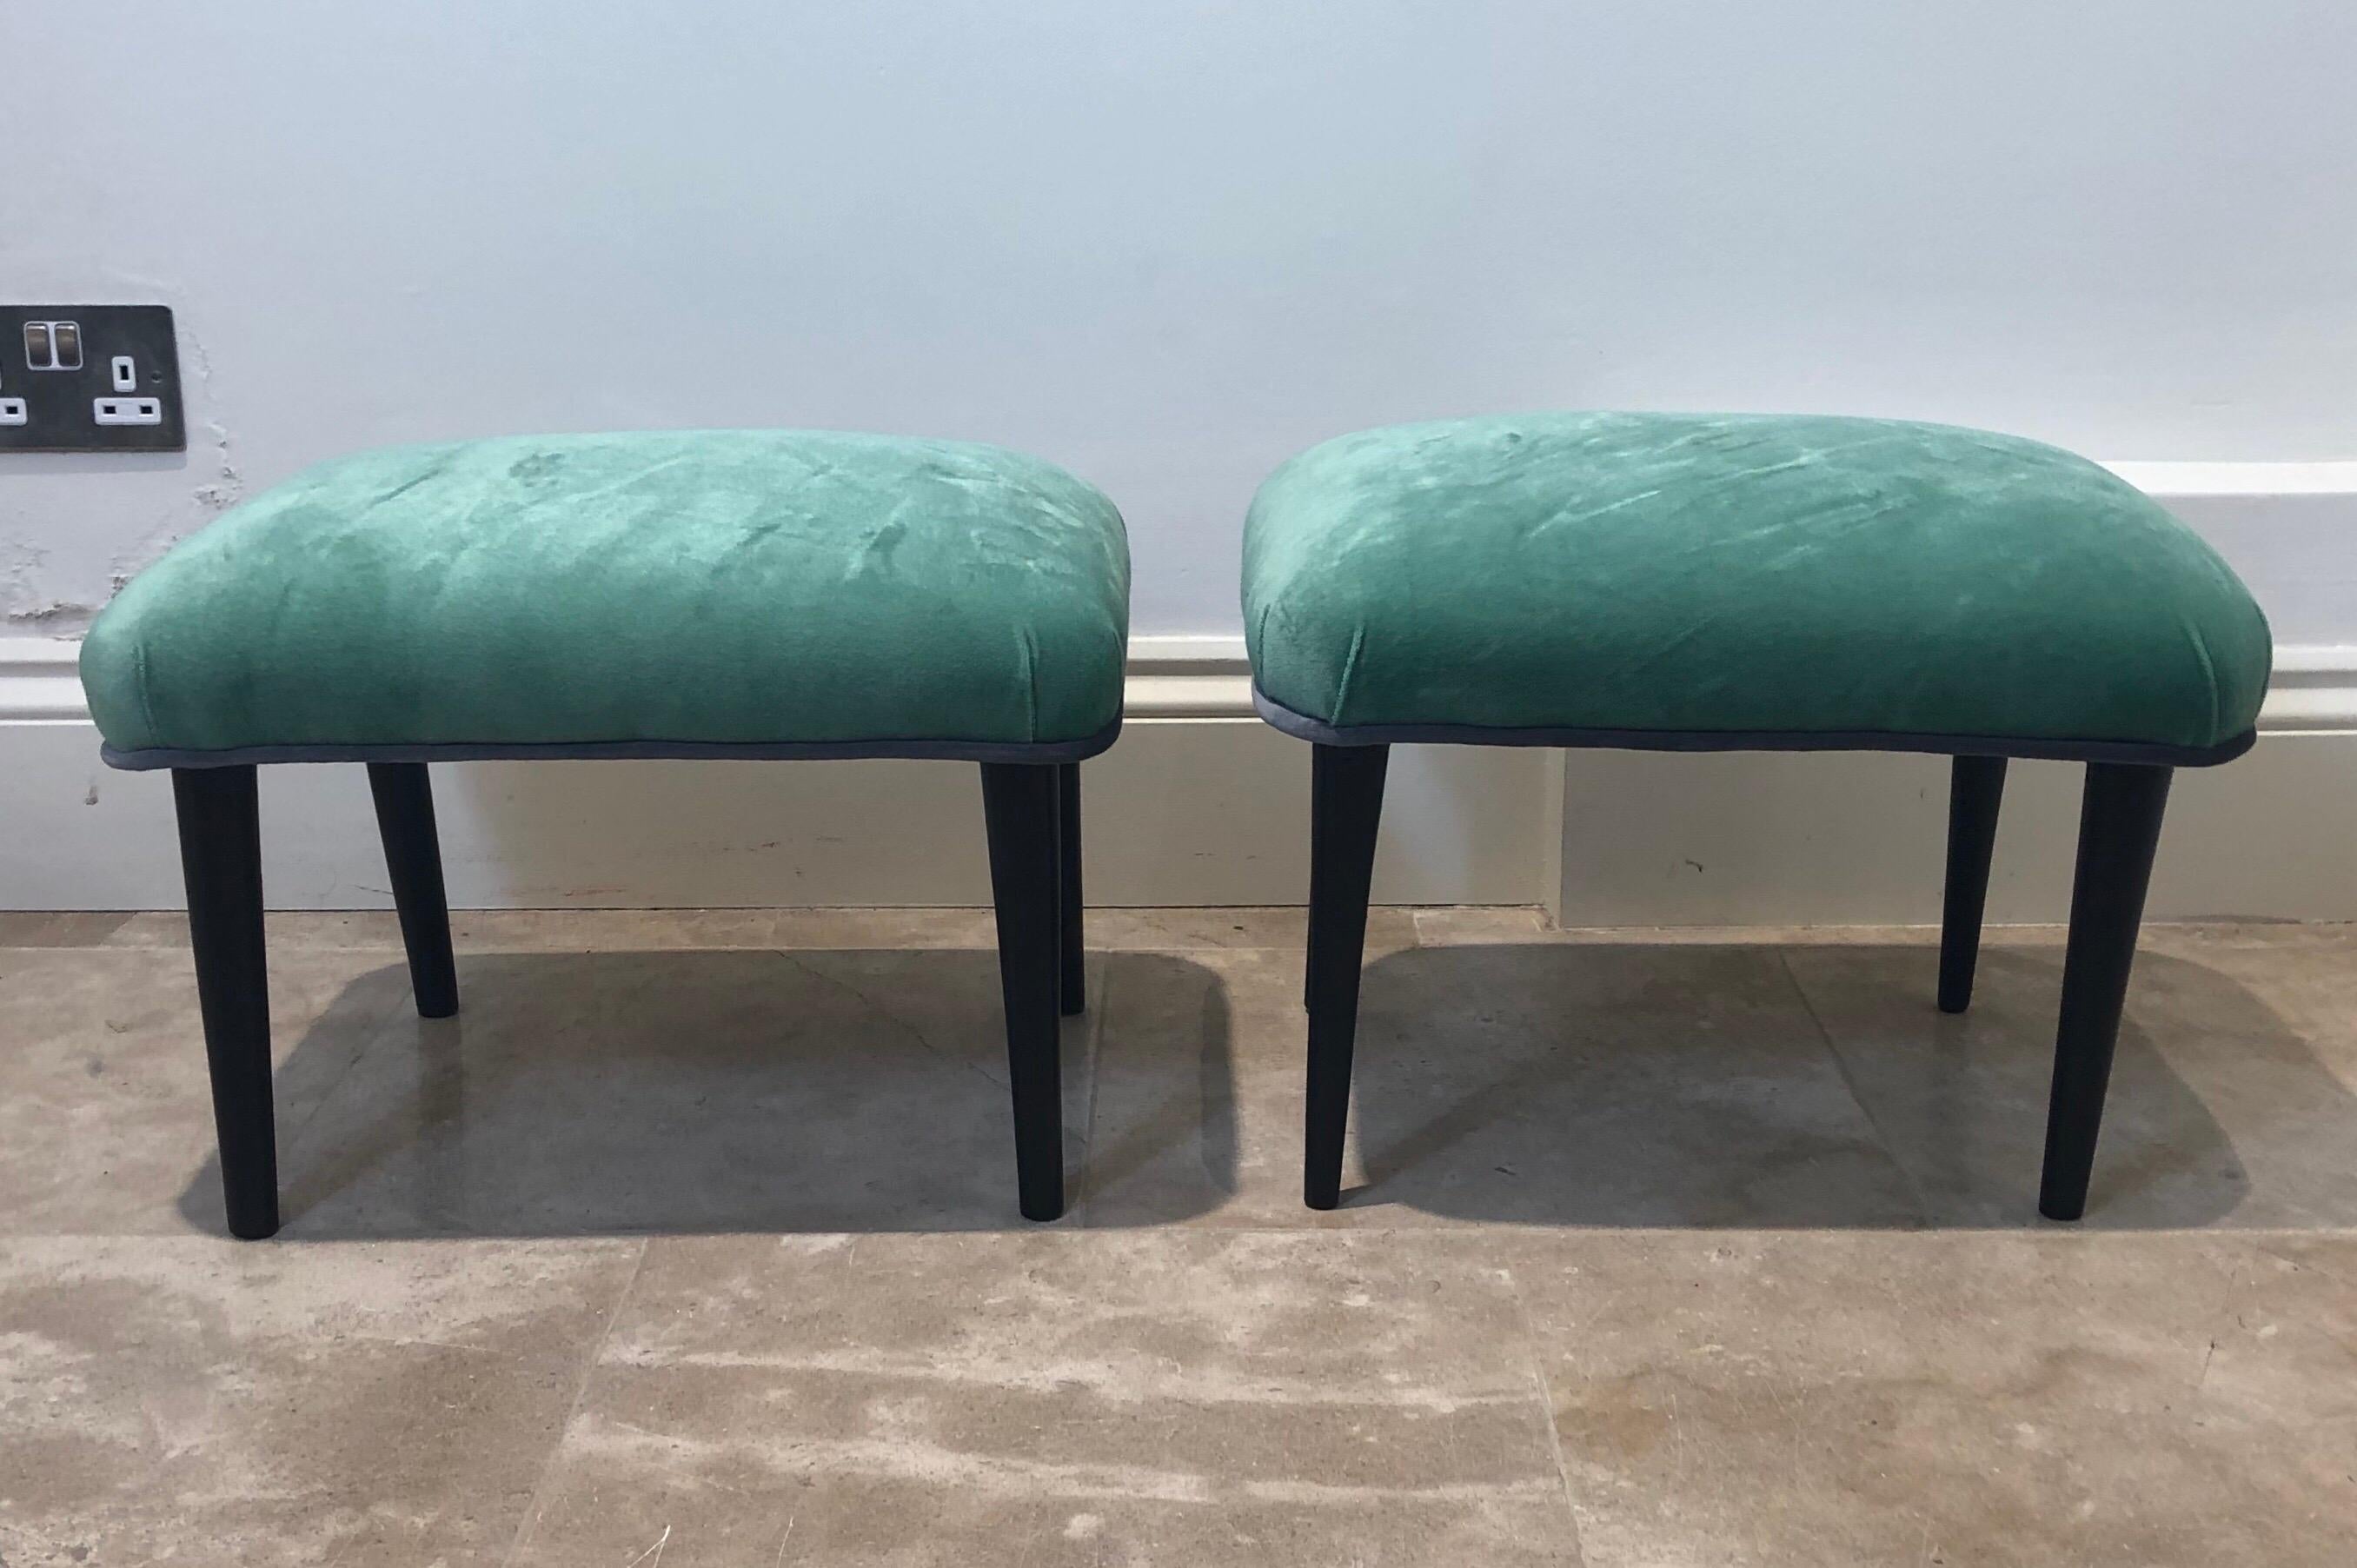 Pair of Italian Curved Chairs and Stools with Mint Green and Grey Upholstery For Sale 7